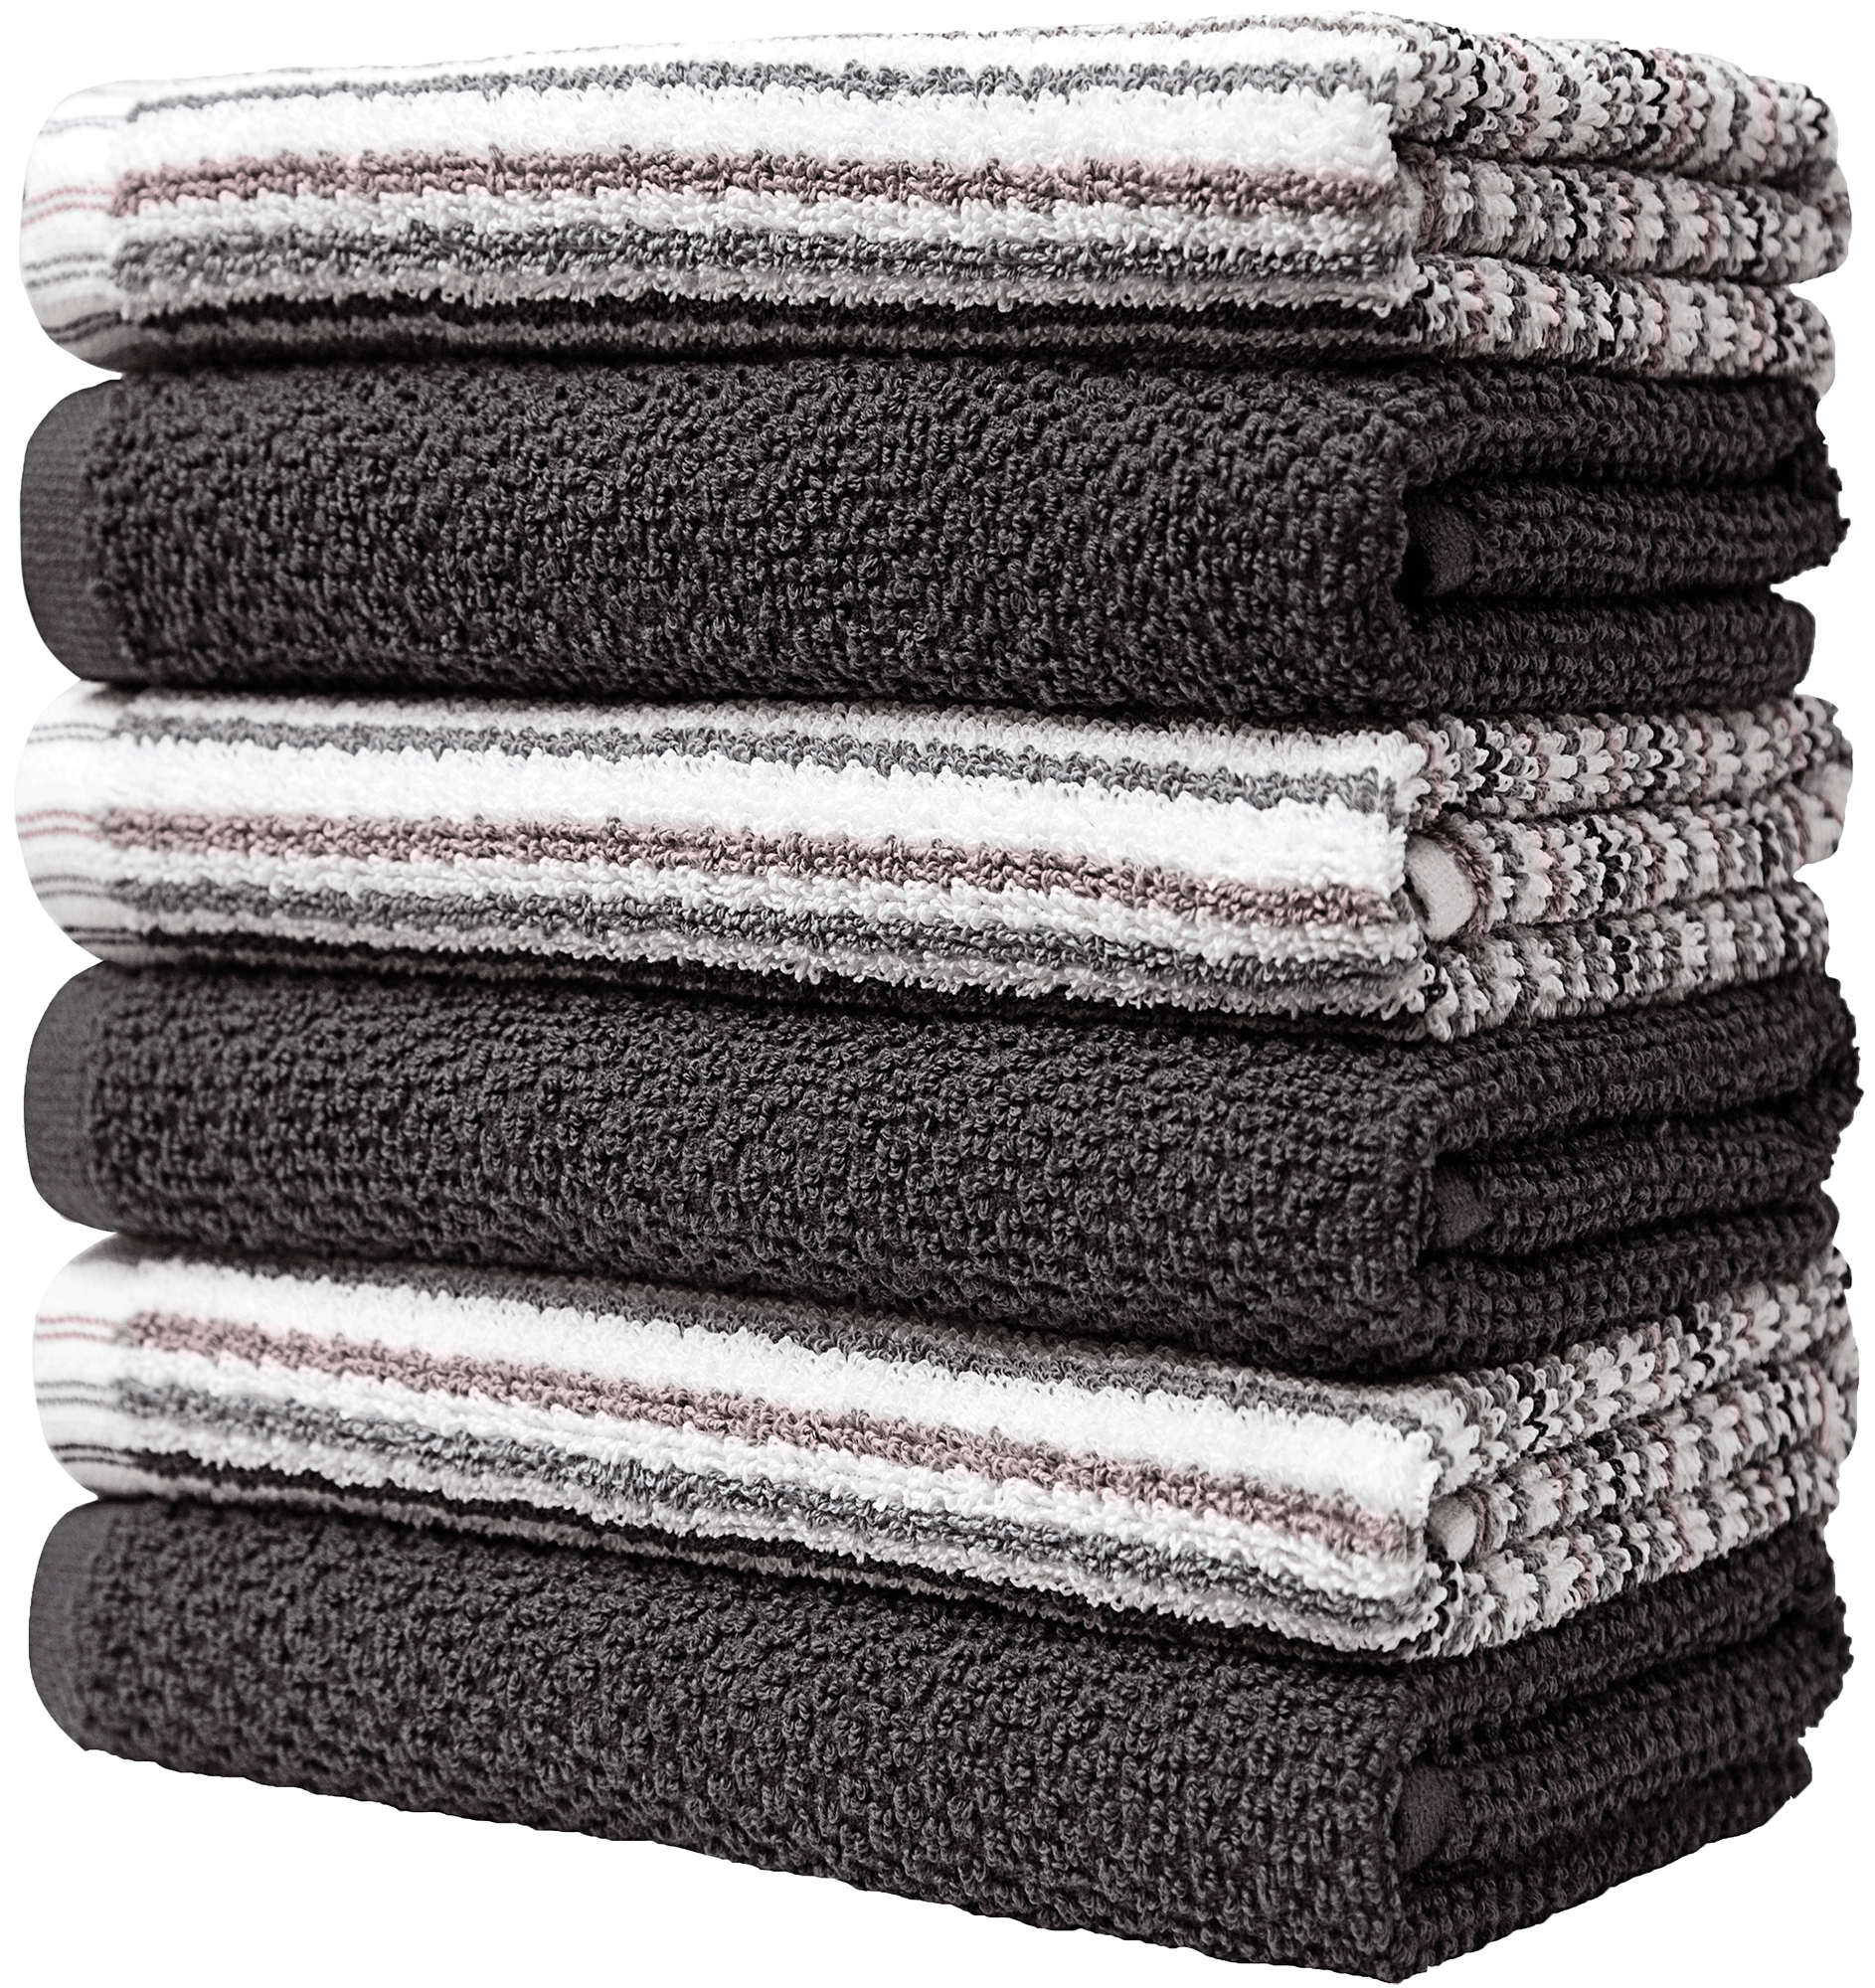 Oeleky Kitchen Towel Pack of 6, Absorbent Cotton Dish Towels for Kitchen  15x26 Inches, Stripe Design Kitchen Hand Towels